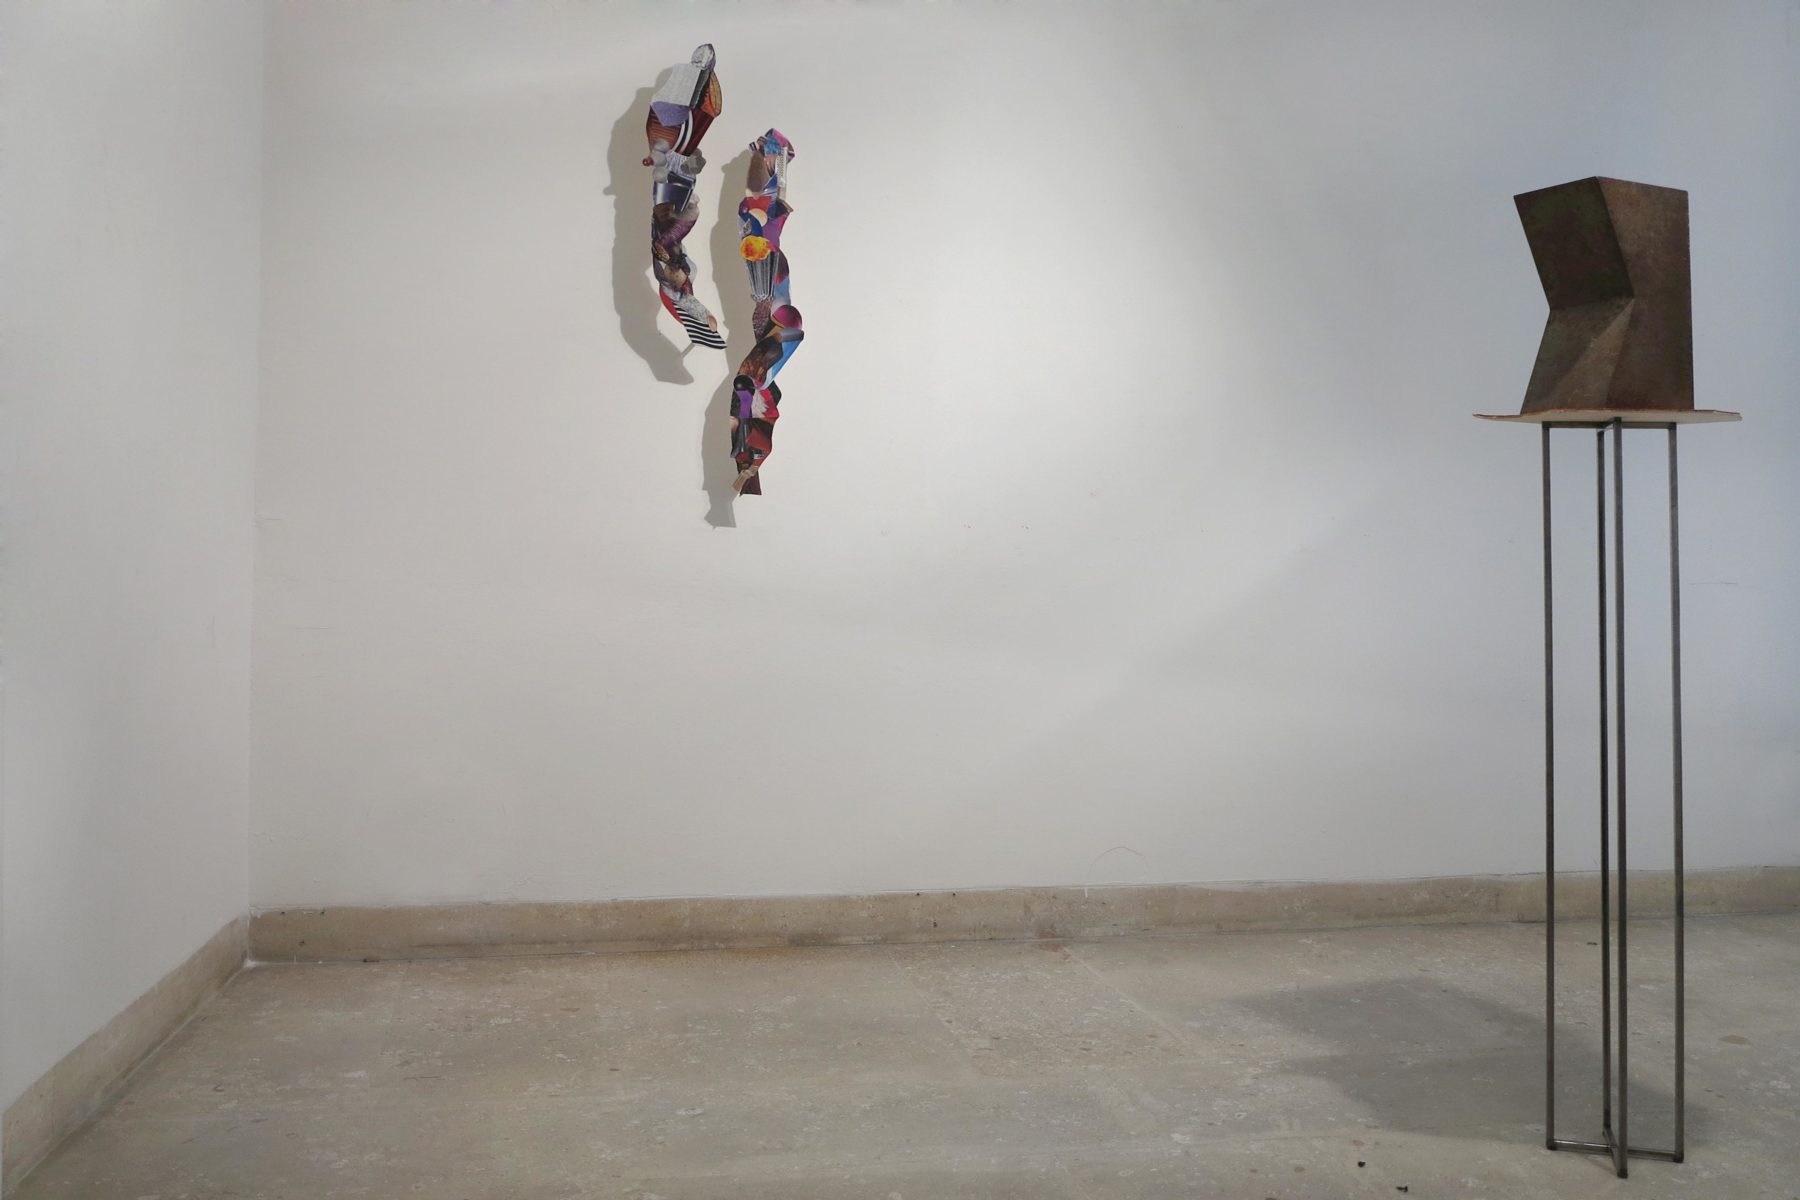 N. Genovese, Inner Self Fitting #1 and #2, 2013, installation view